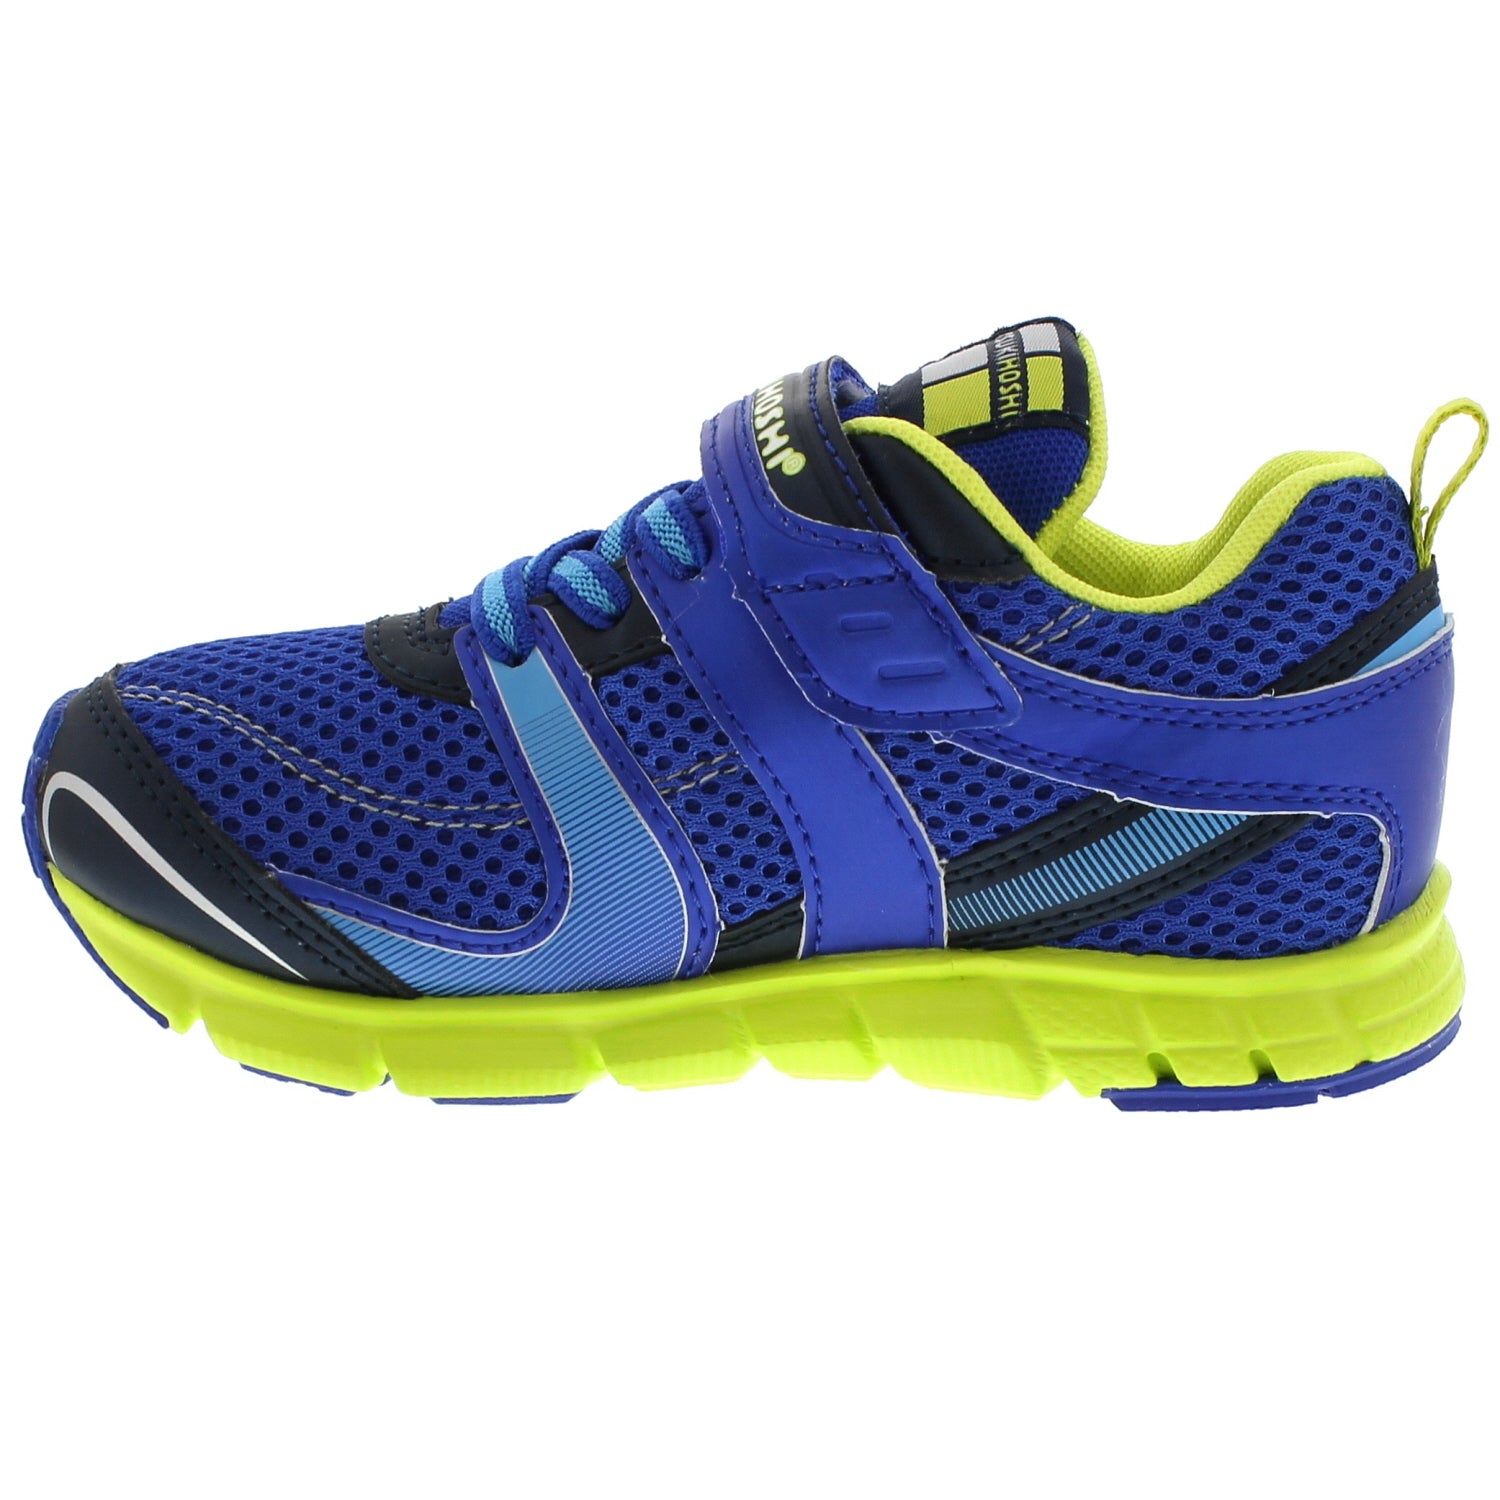 Velocity Kid's Athletic Trainer - Blue/Lime